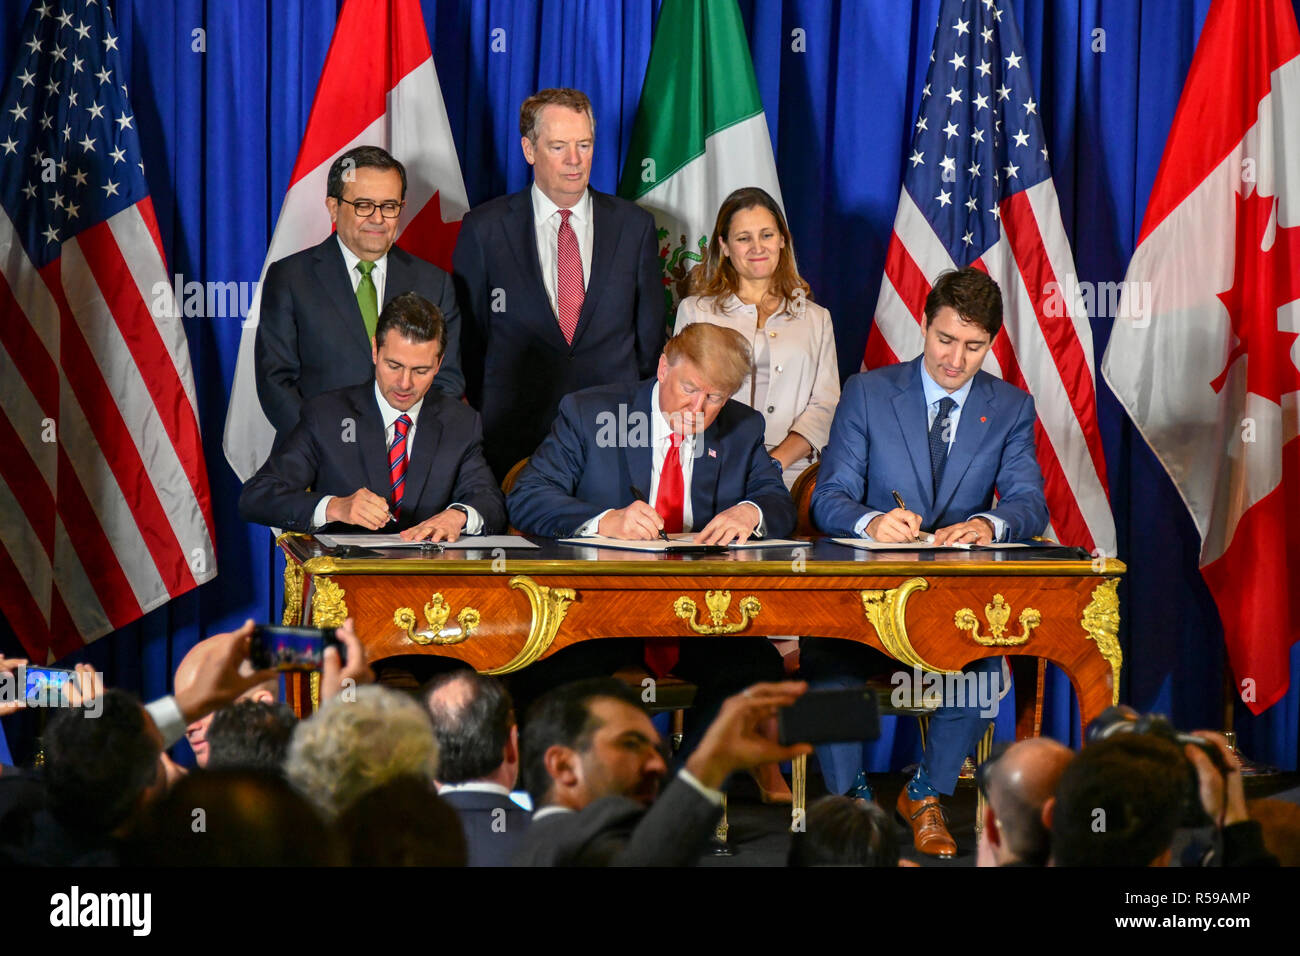 U.S. President Donald Trump, center, Canadian Prime Minister Justin Trudeau, right, and Mexican President Enrique Pena Neto, left, during a signing ceremony for the new NAFTA trade agreement called USMCA November 30, 2018 in Buenos Aires, Argentina. Stock Photo